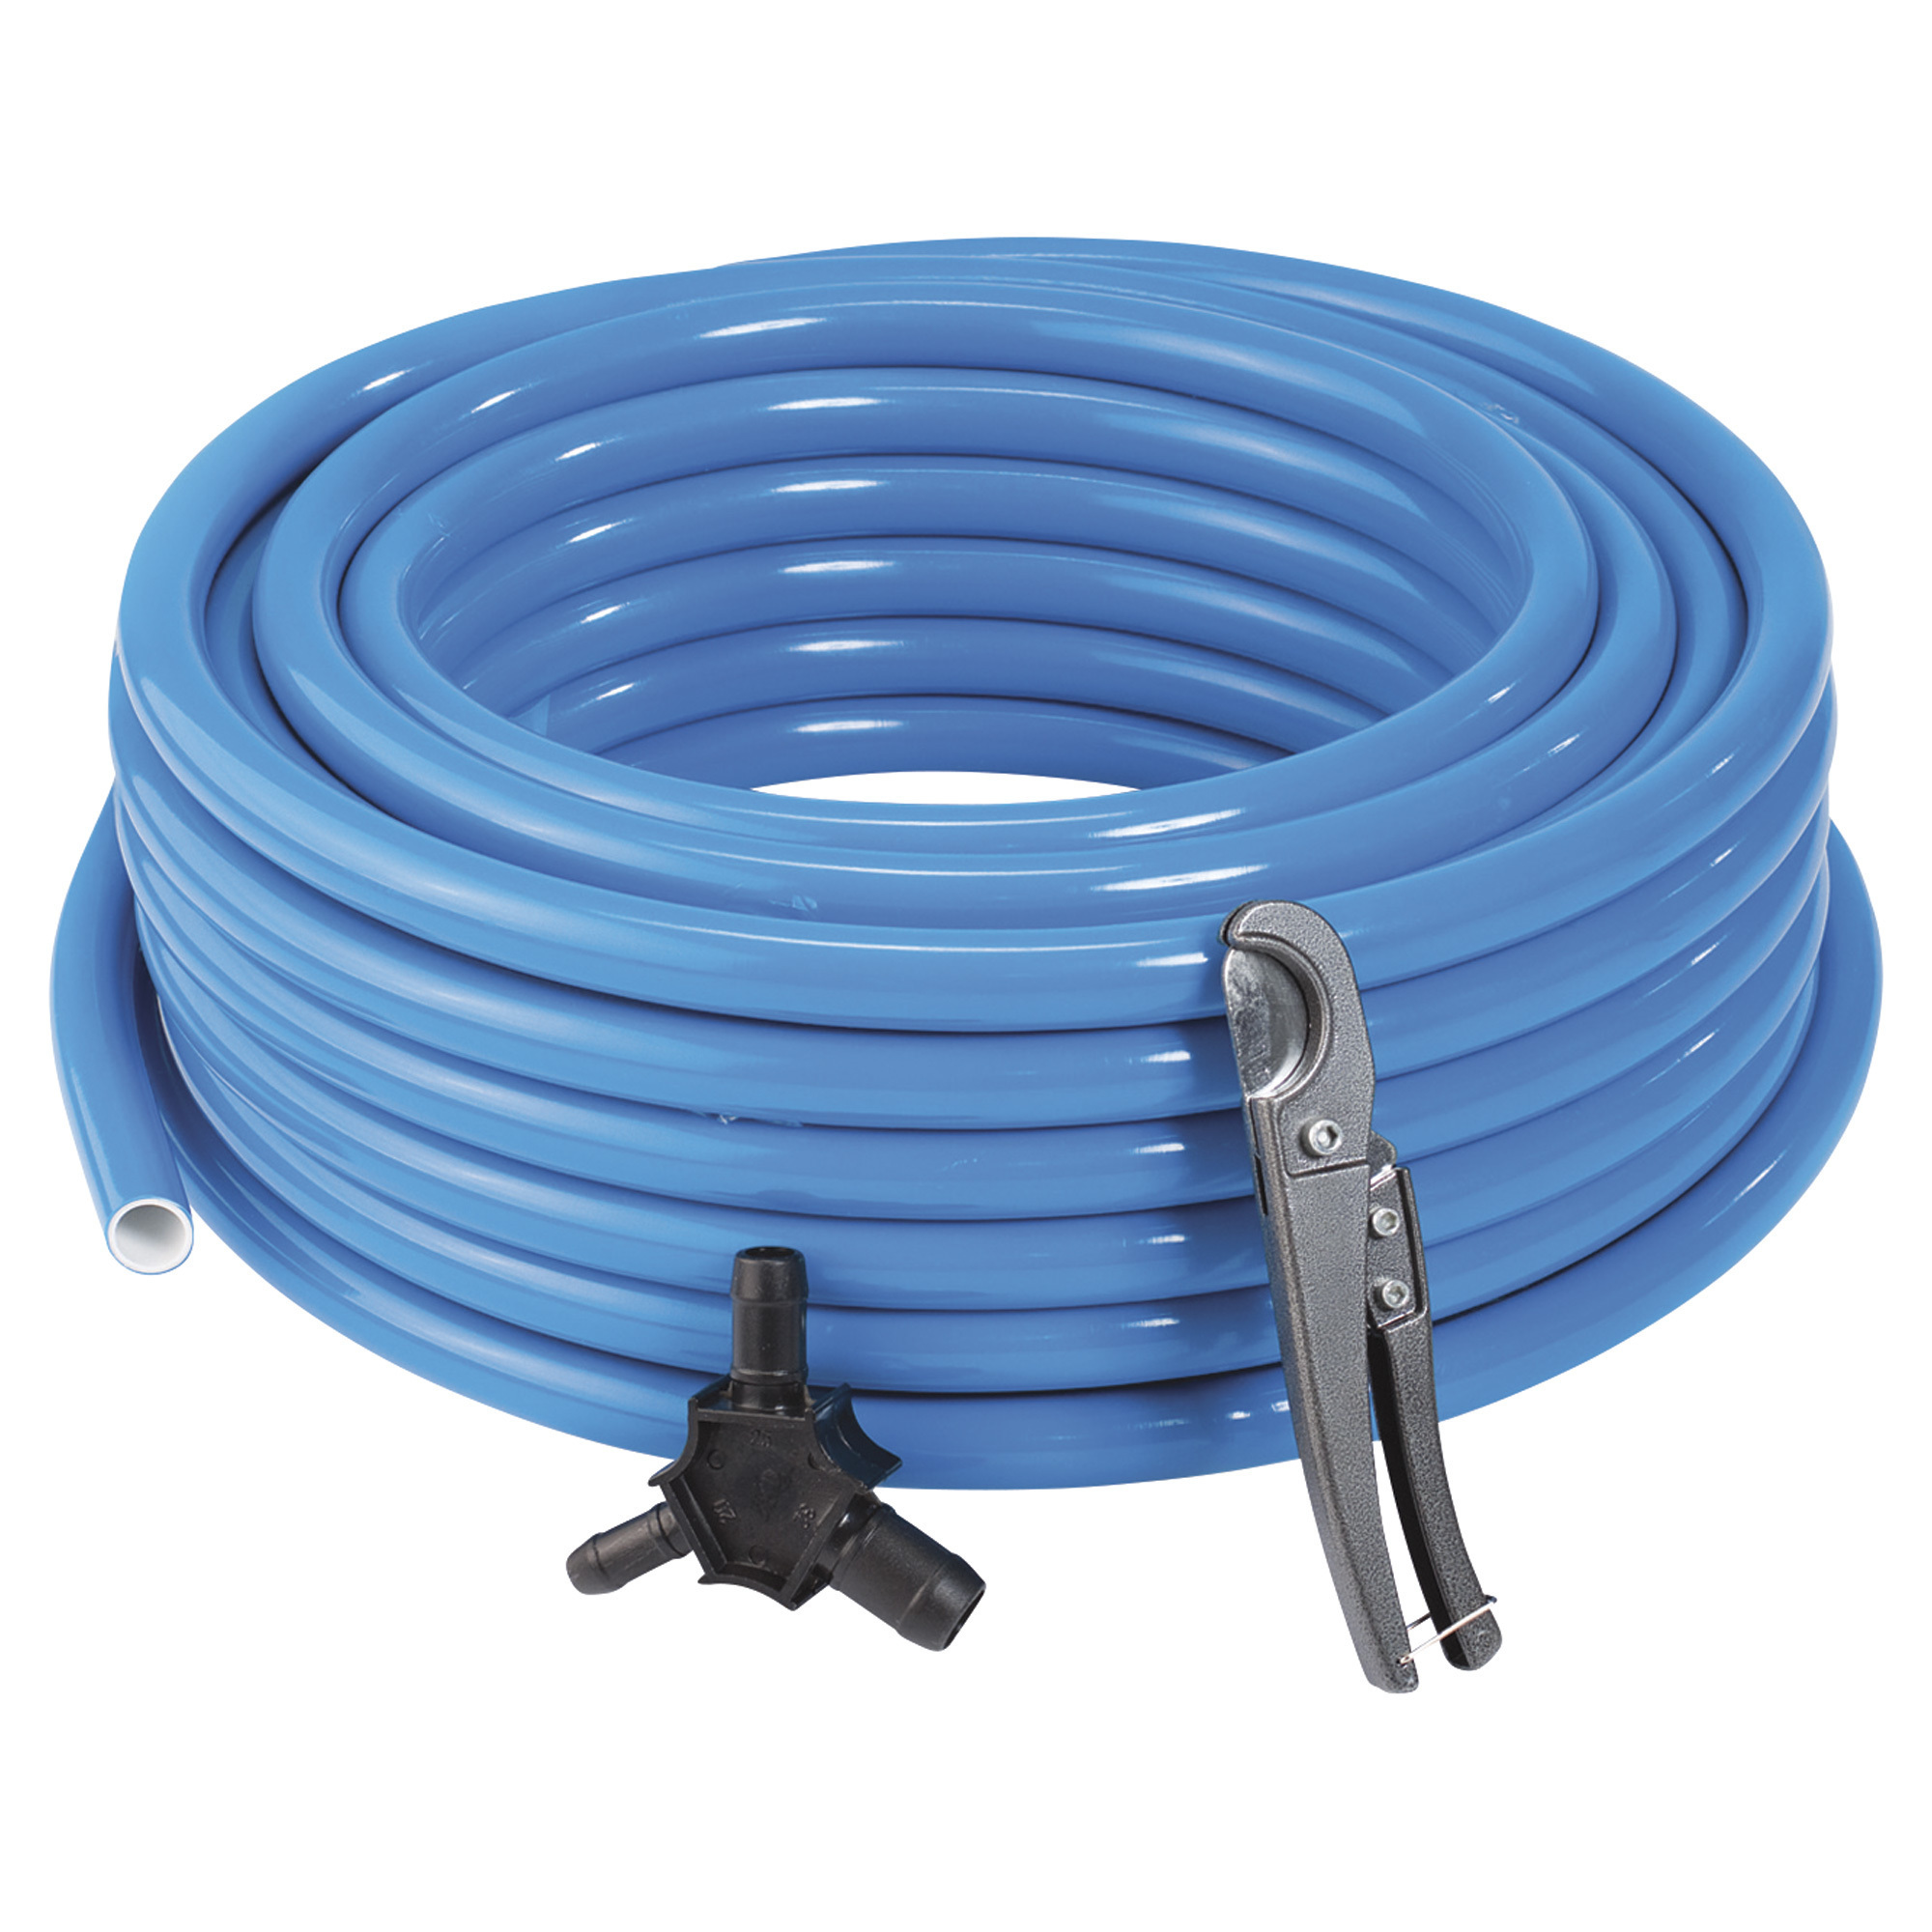 RapidAir 3/4Inch MaxLine Compressed Air Piping, 100ft. Roll of HDPE/Aluminum Core Tubing, Model M6030